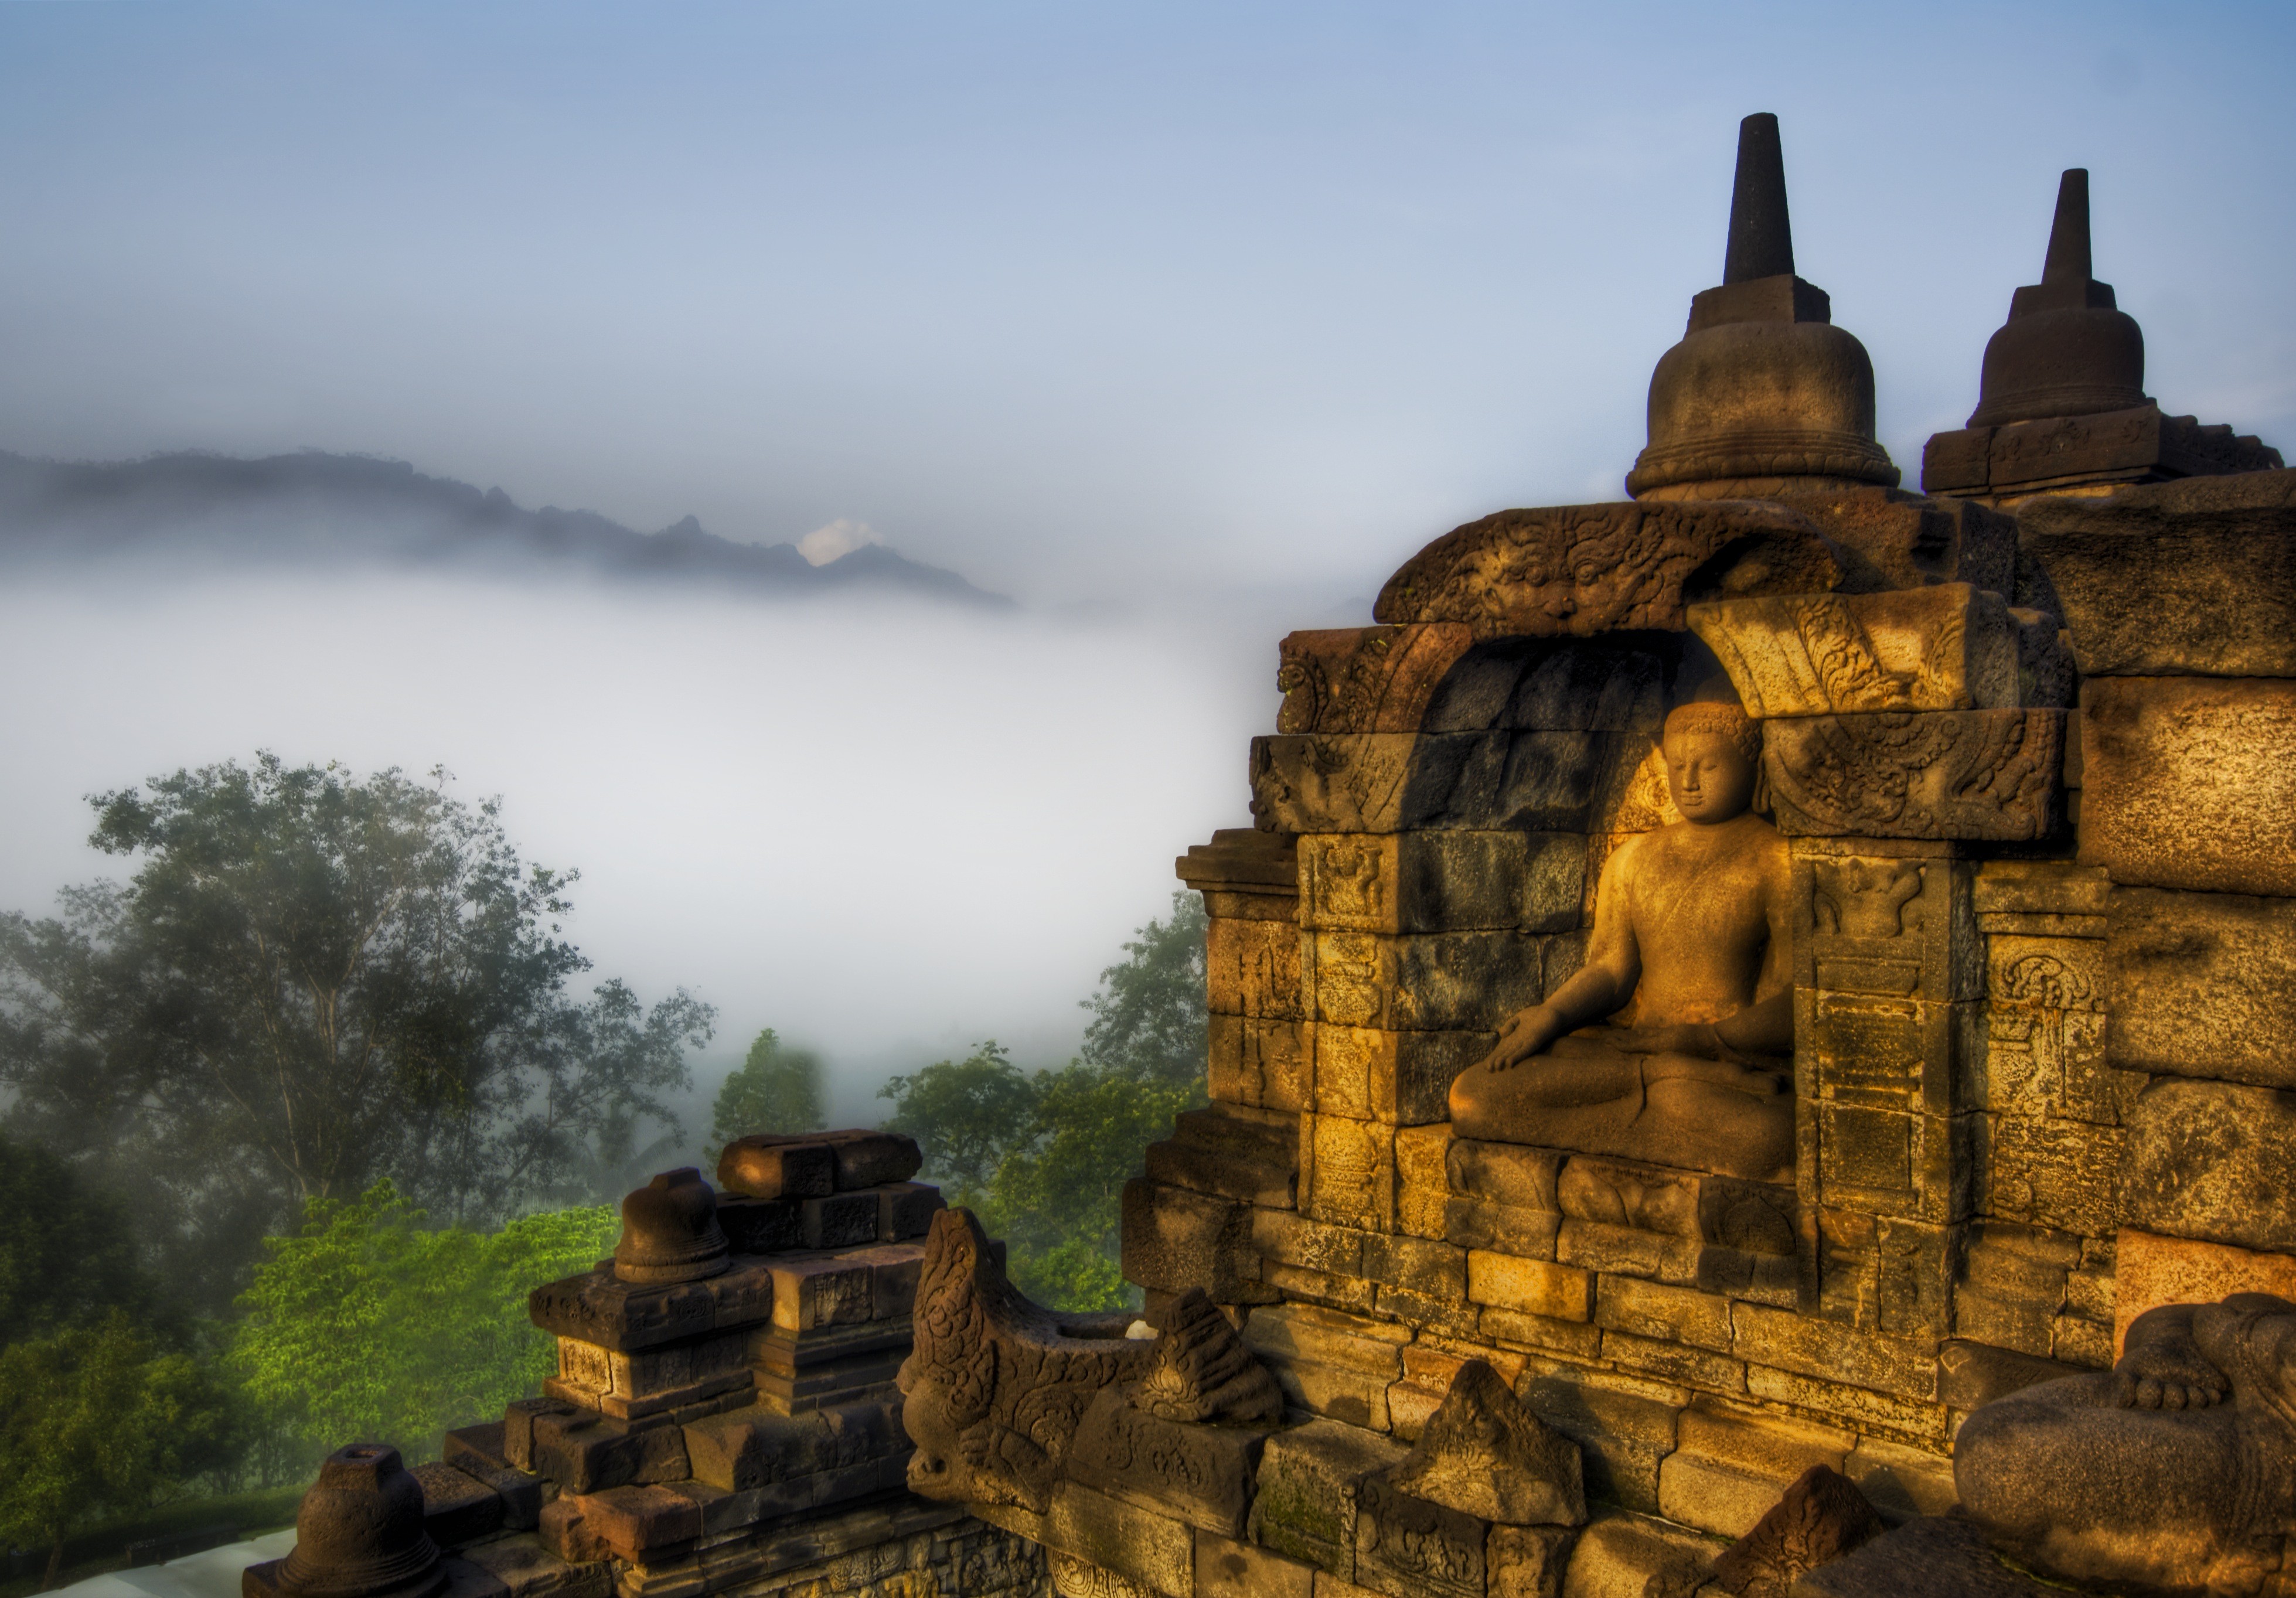 Architecture Religious Temple Indonesia Buddha Buddhism HDR Trees Mountains Mist Stones Sculpture Me 3918x2727